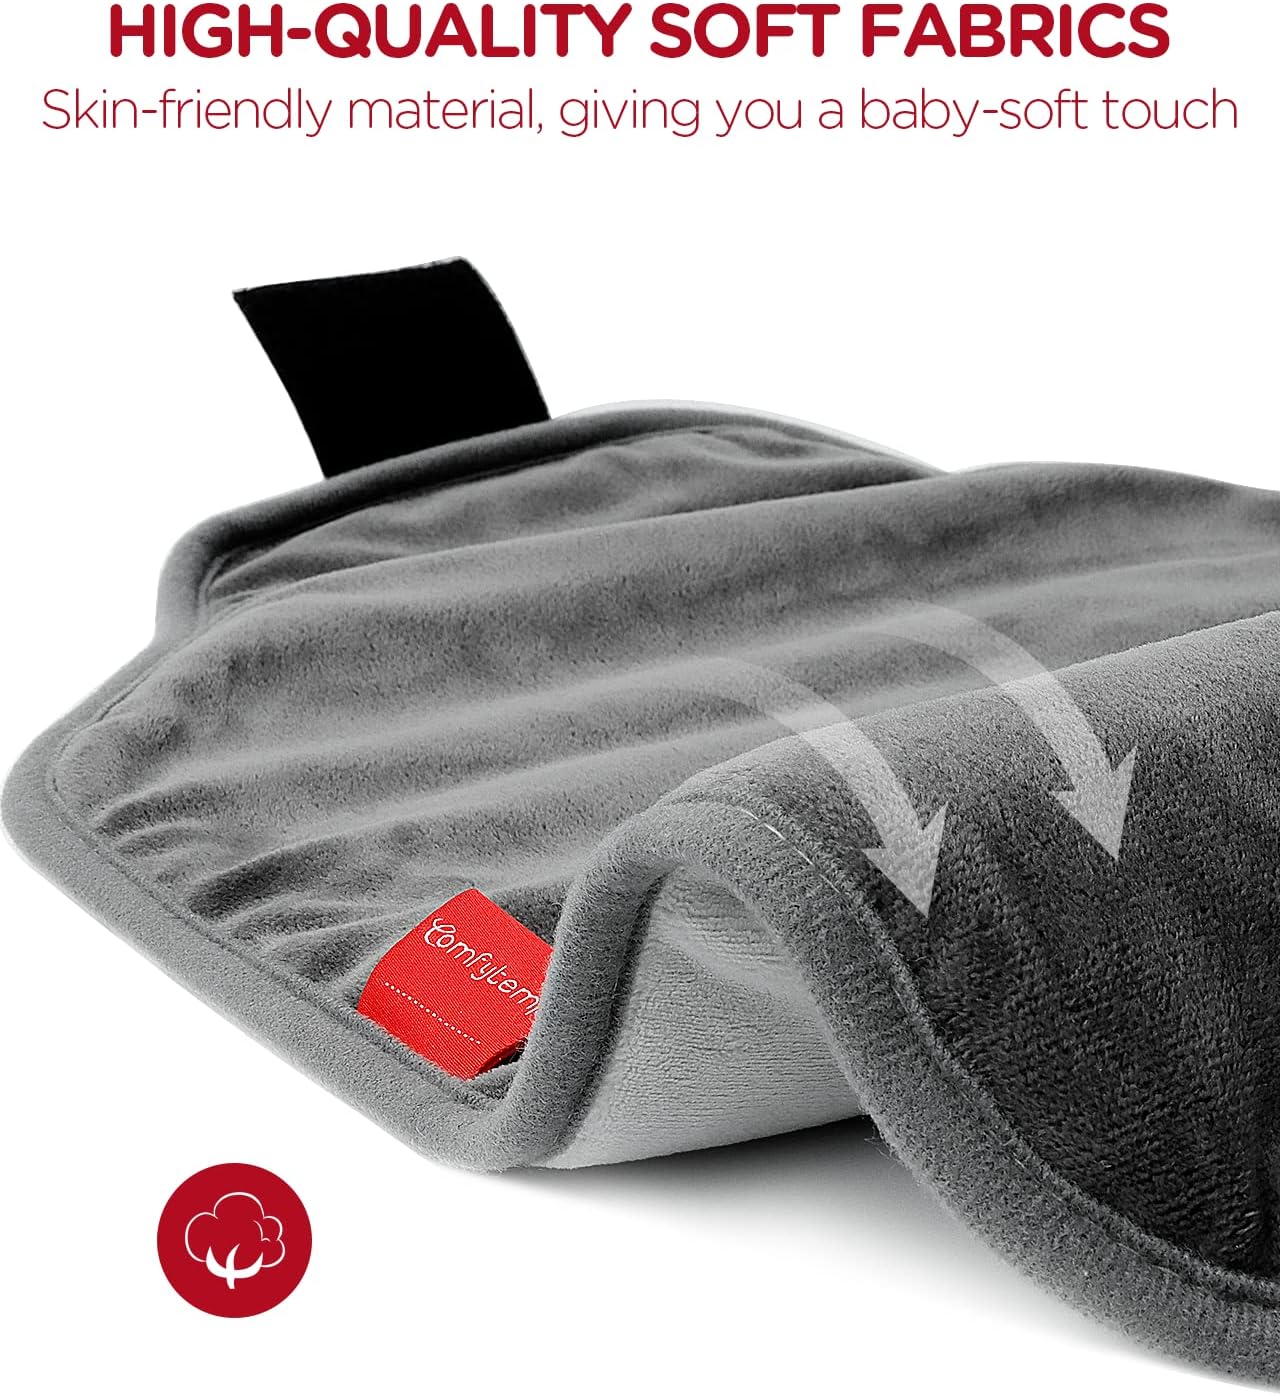 ComfyWarmth™ Upgraded Heating Pad for Back Pain Relief